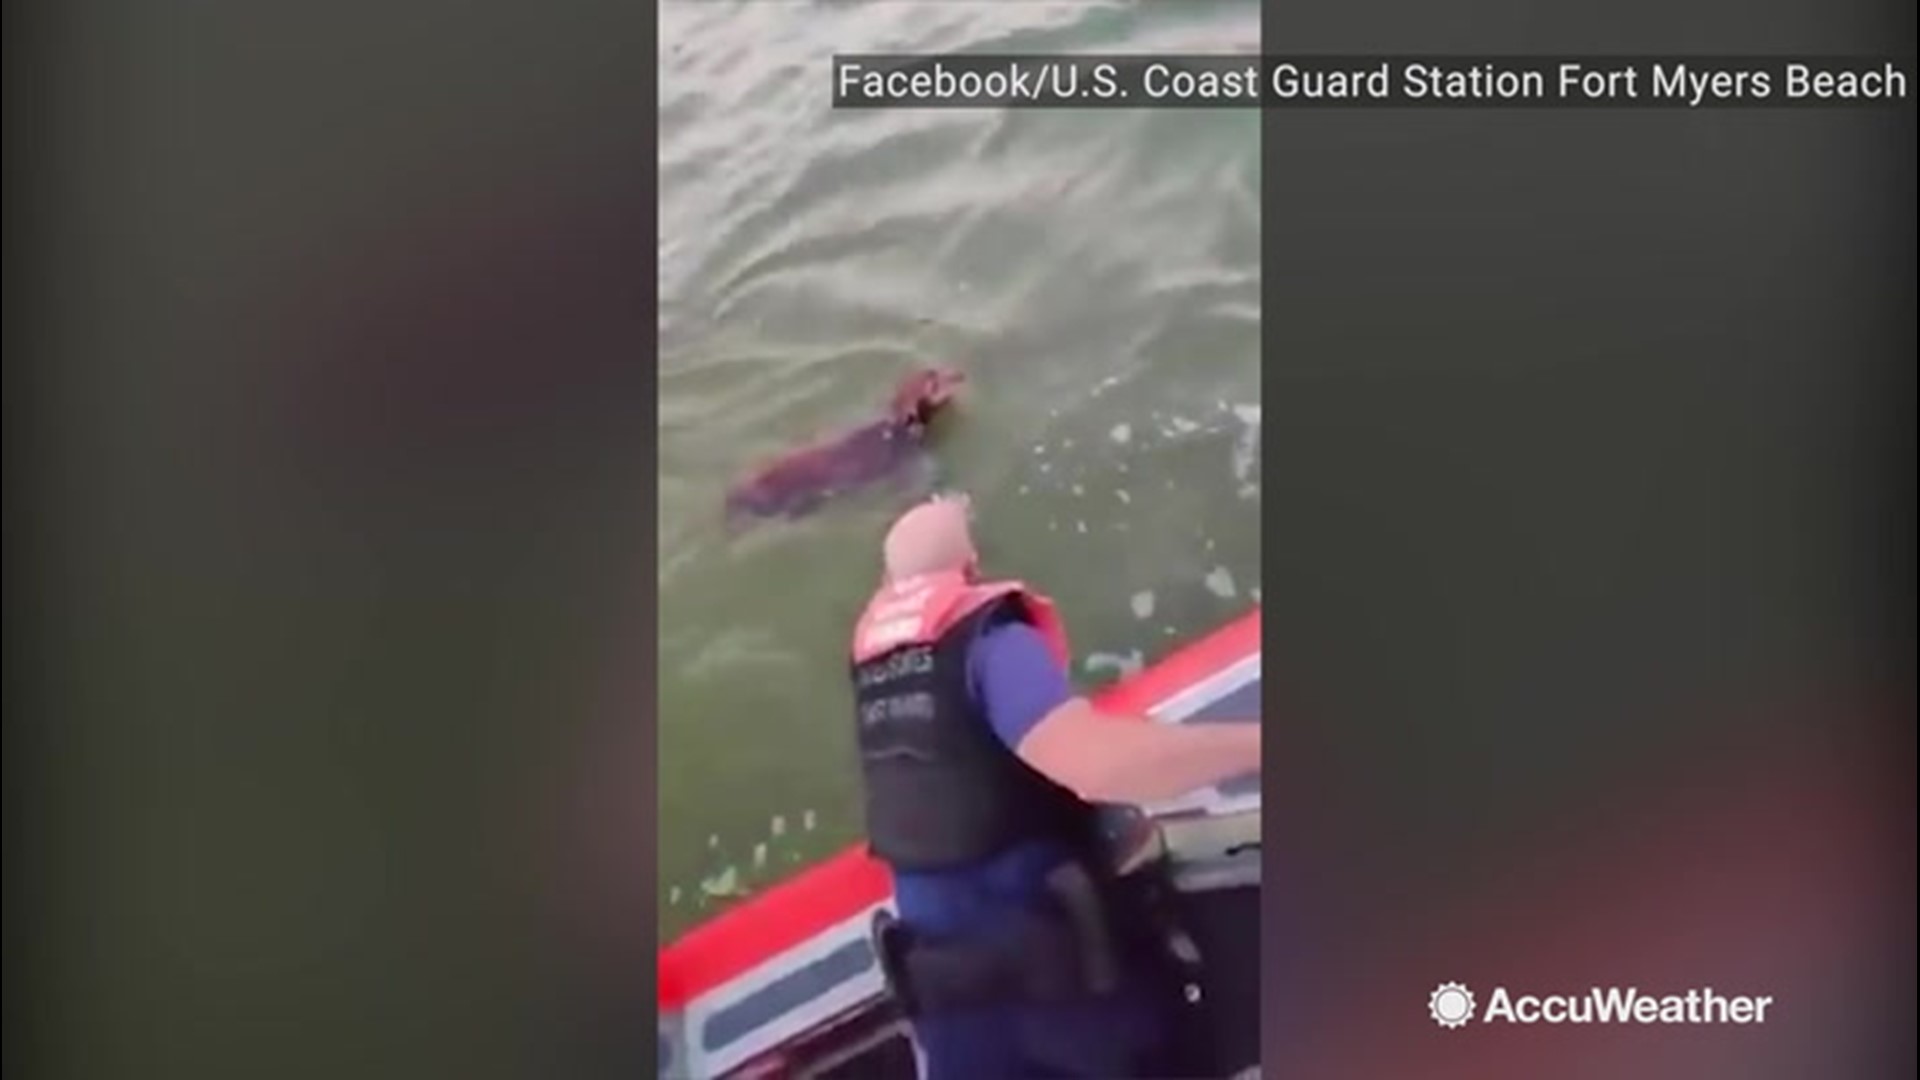 A few members of the U.S. Coast Guard found a dog paddling off the coast of Bowditch Point in Fort Myers Beach, Florida, and pulled him to safety on Dec. 4.